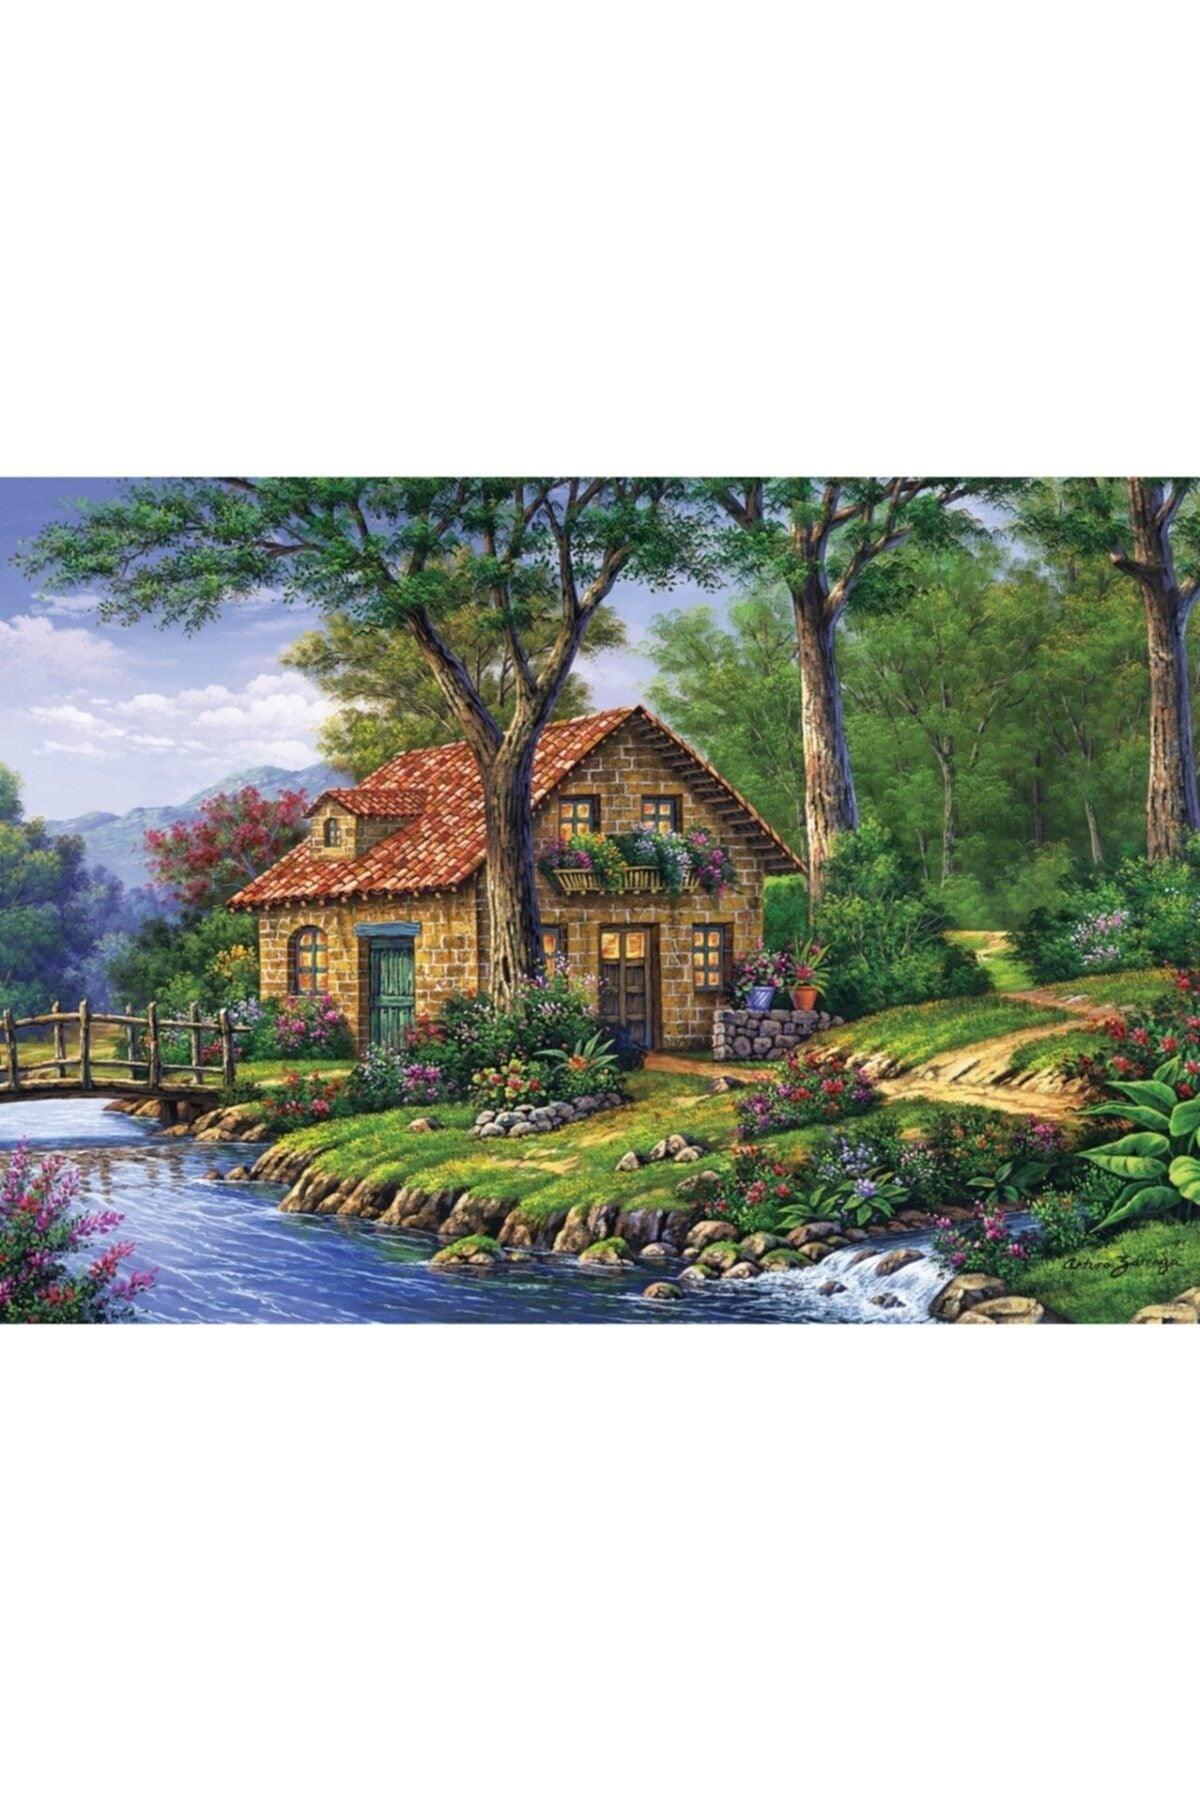 On the Edge of Peace 1000 Piece Jigsaw Puzzle - Swordslife